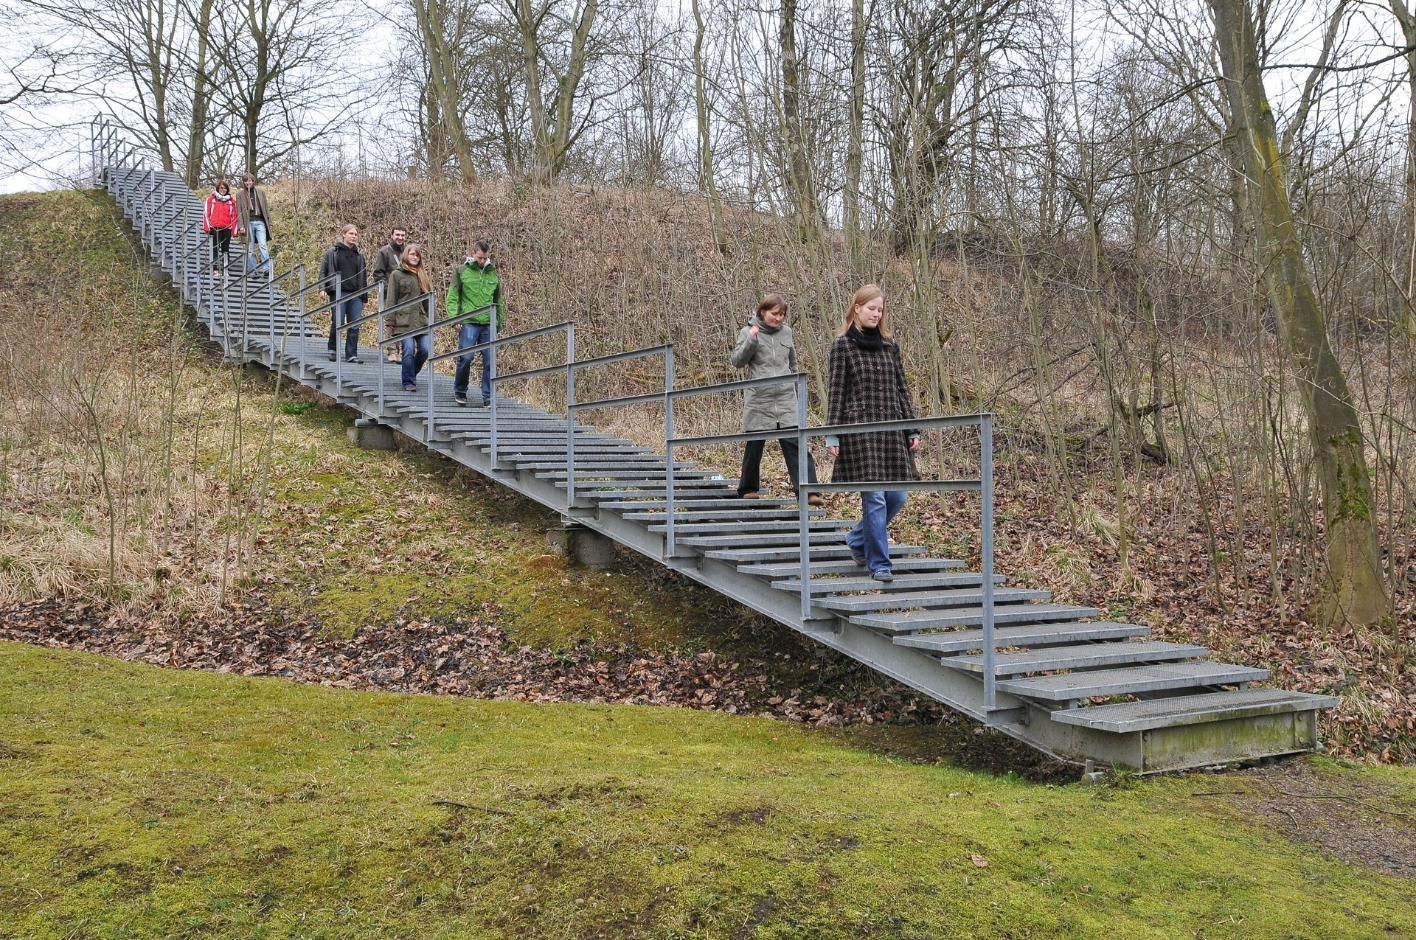 Visitors walk the time corridor from the camp. A staircase leads down to the former post path.